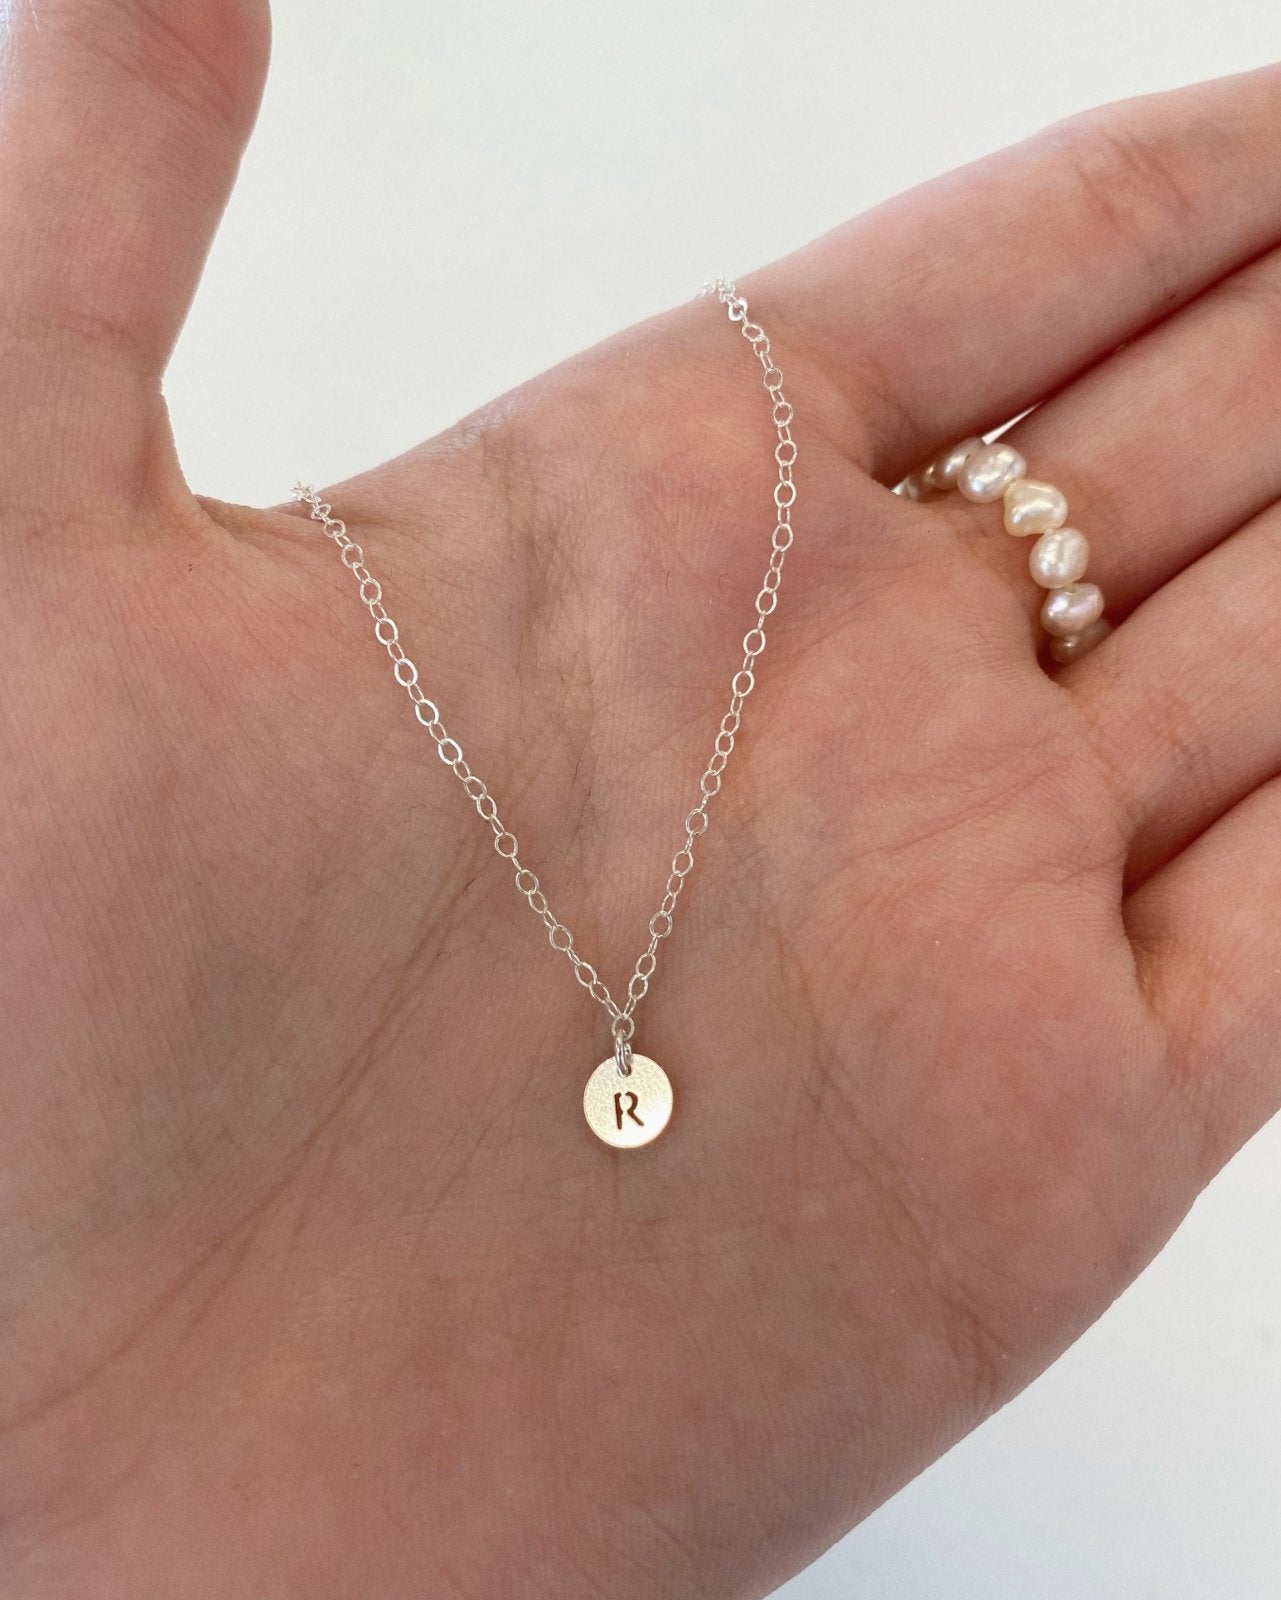 LETTER COIN NECKLACE- Sterling Silver - The Littl - Deluxe Chain - 37cm (choker)